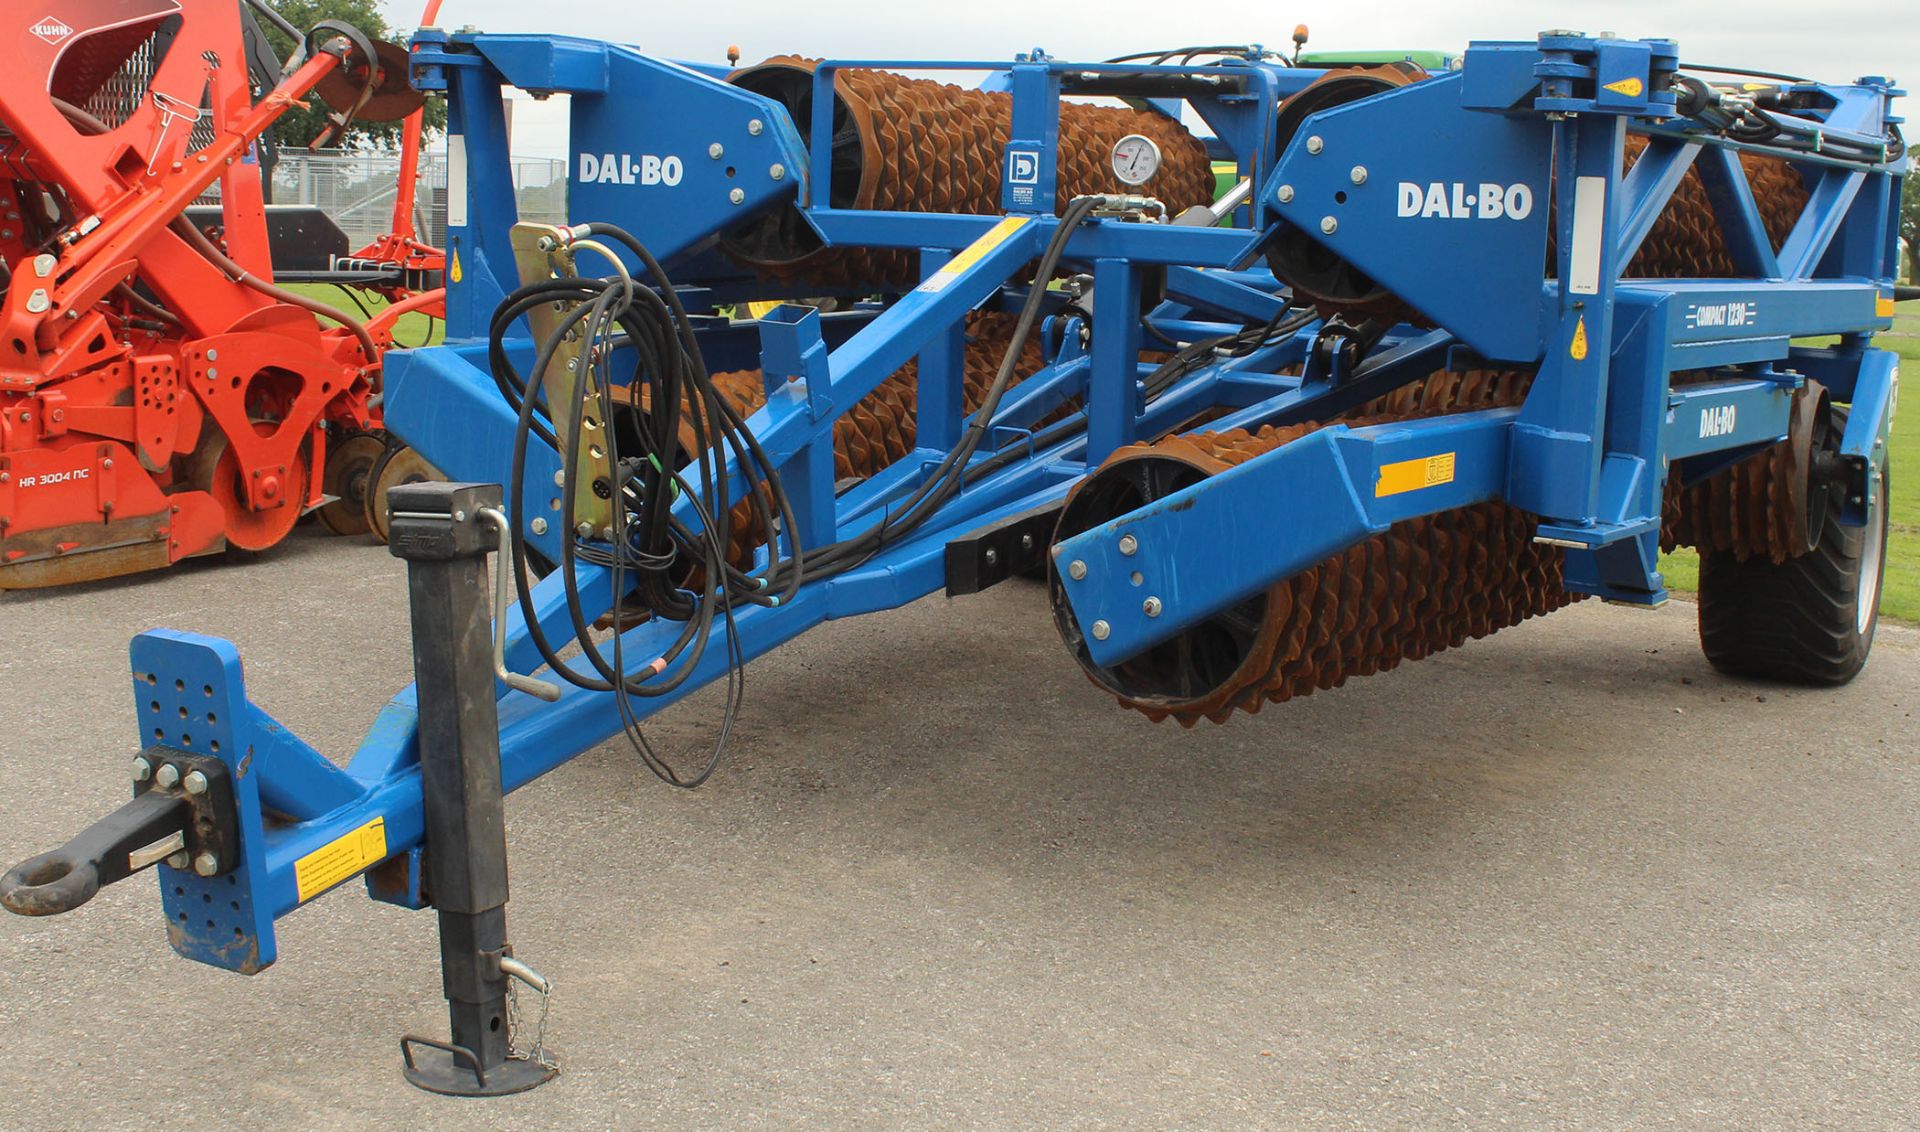 A 2014/15 12.3 METRE DAL-BQ COMPACT 1230 WITH FOLDING ROLLERS AND INSTRUCTION BOOK/MANUAL